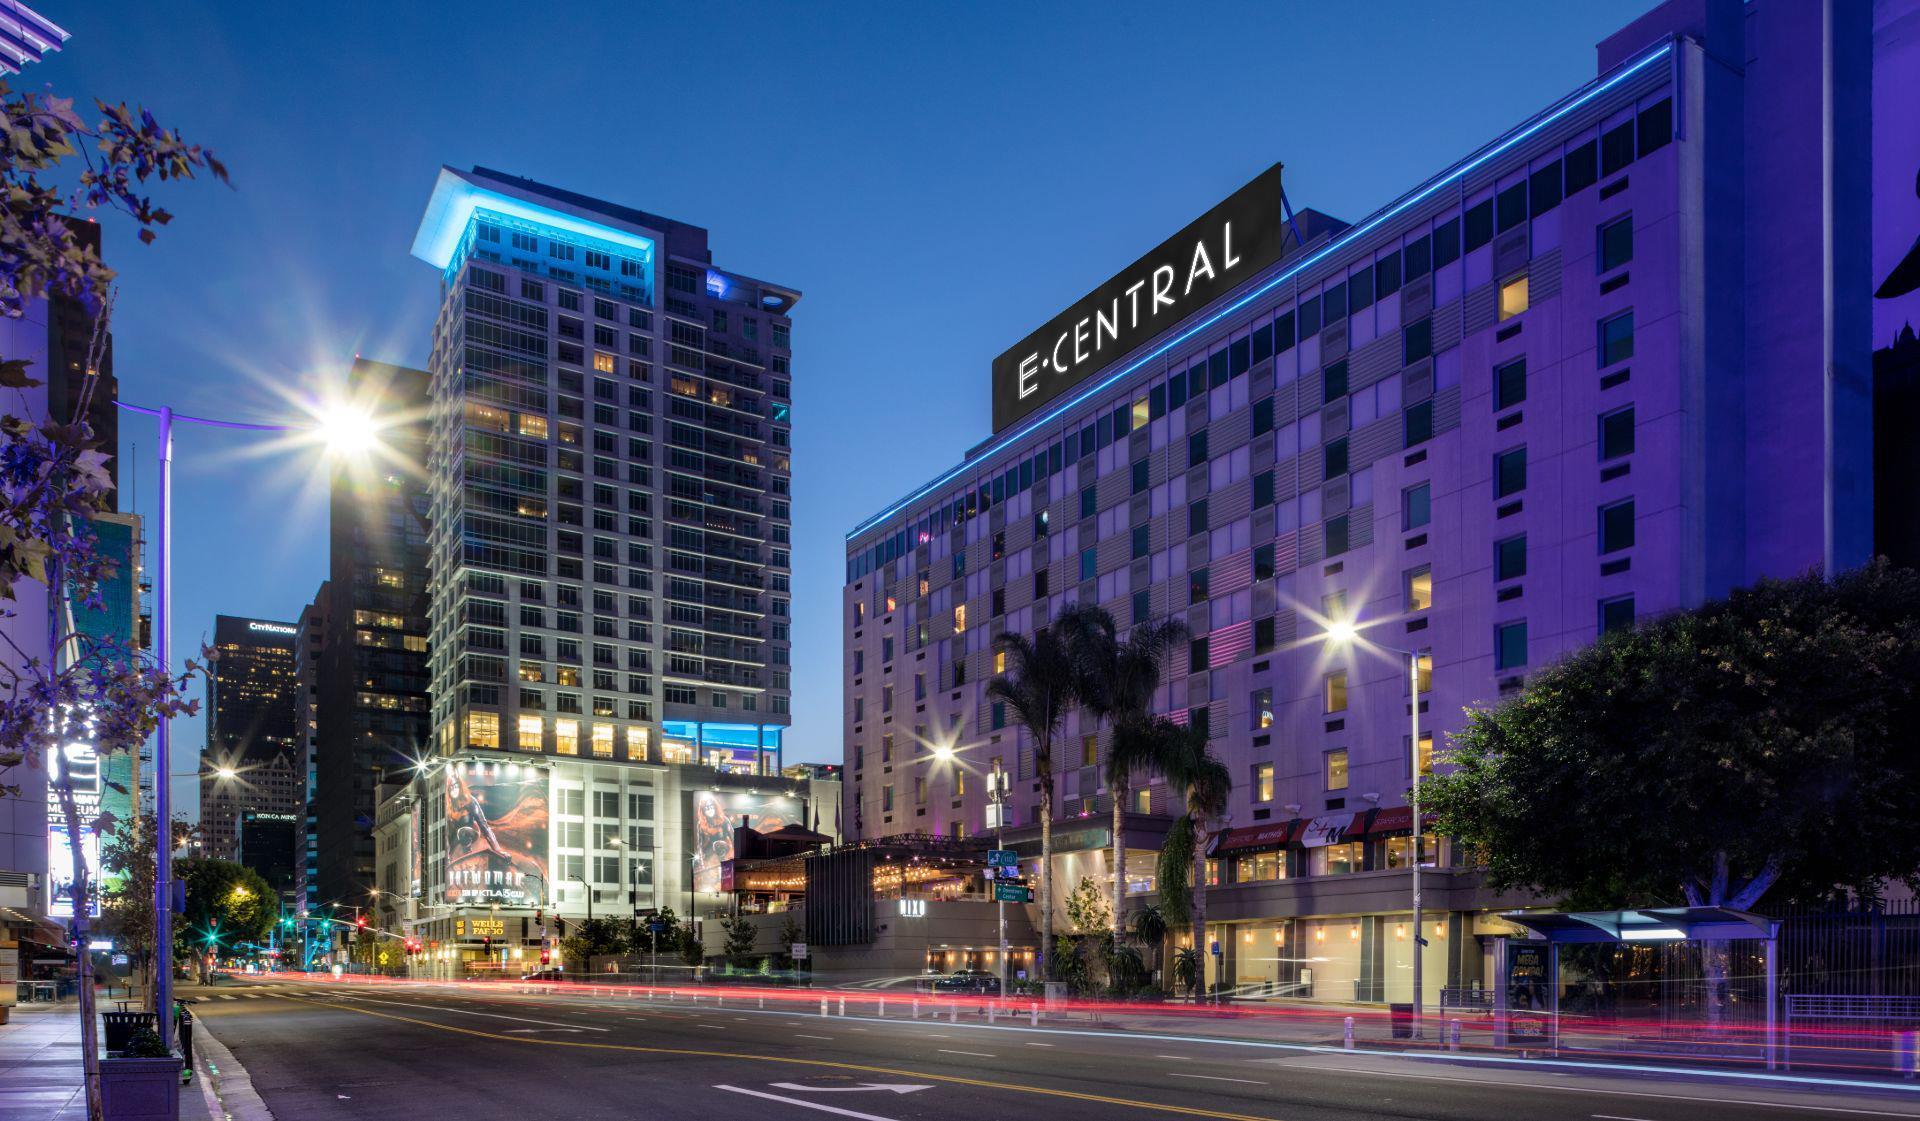 E-Central Downtown Los Angeles Hotel in Los Angeles, CA